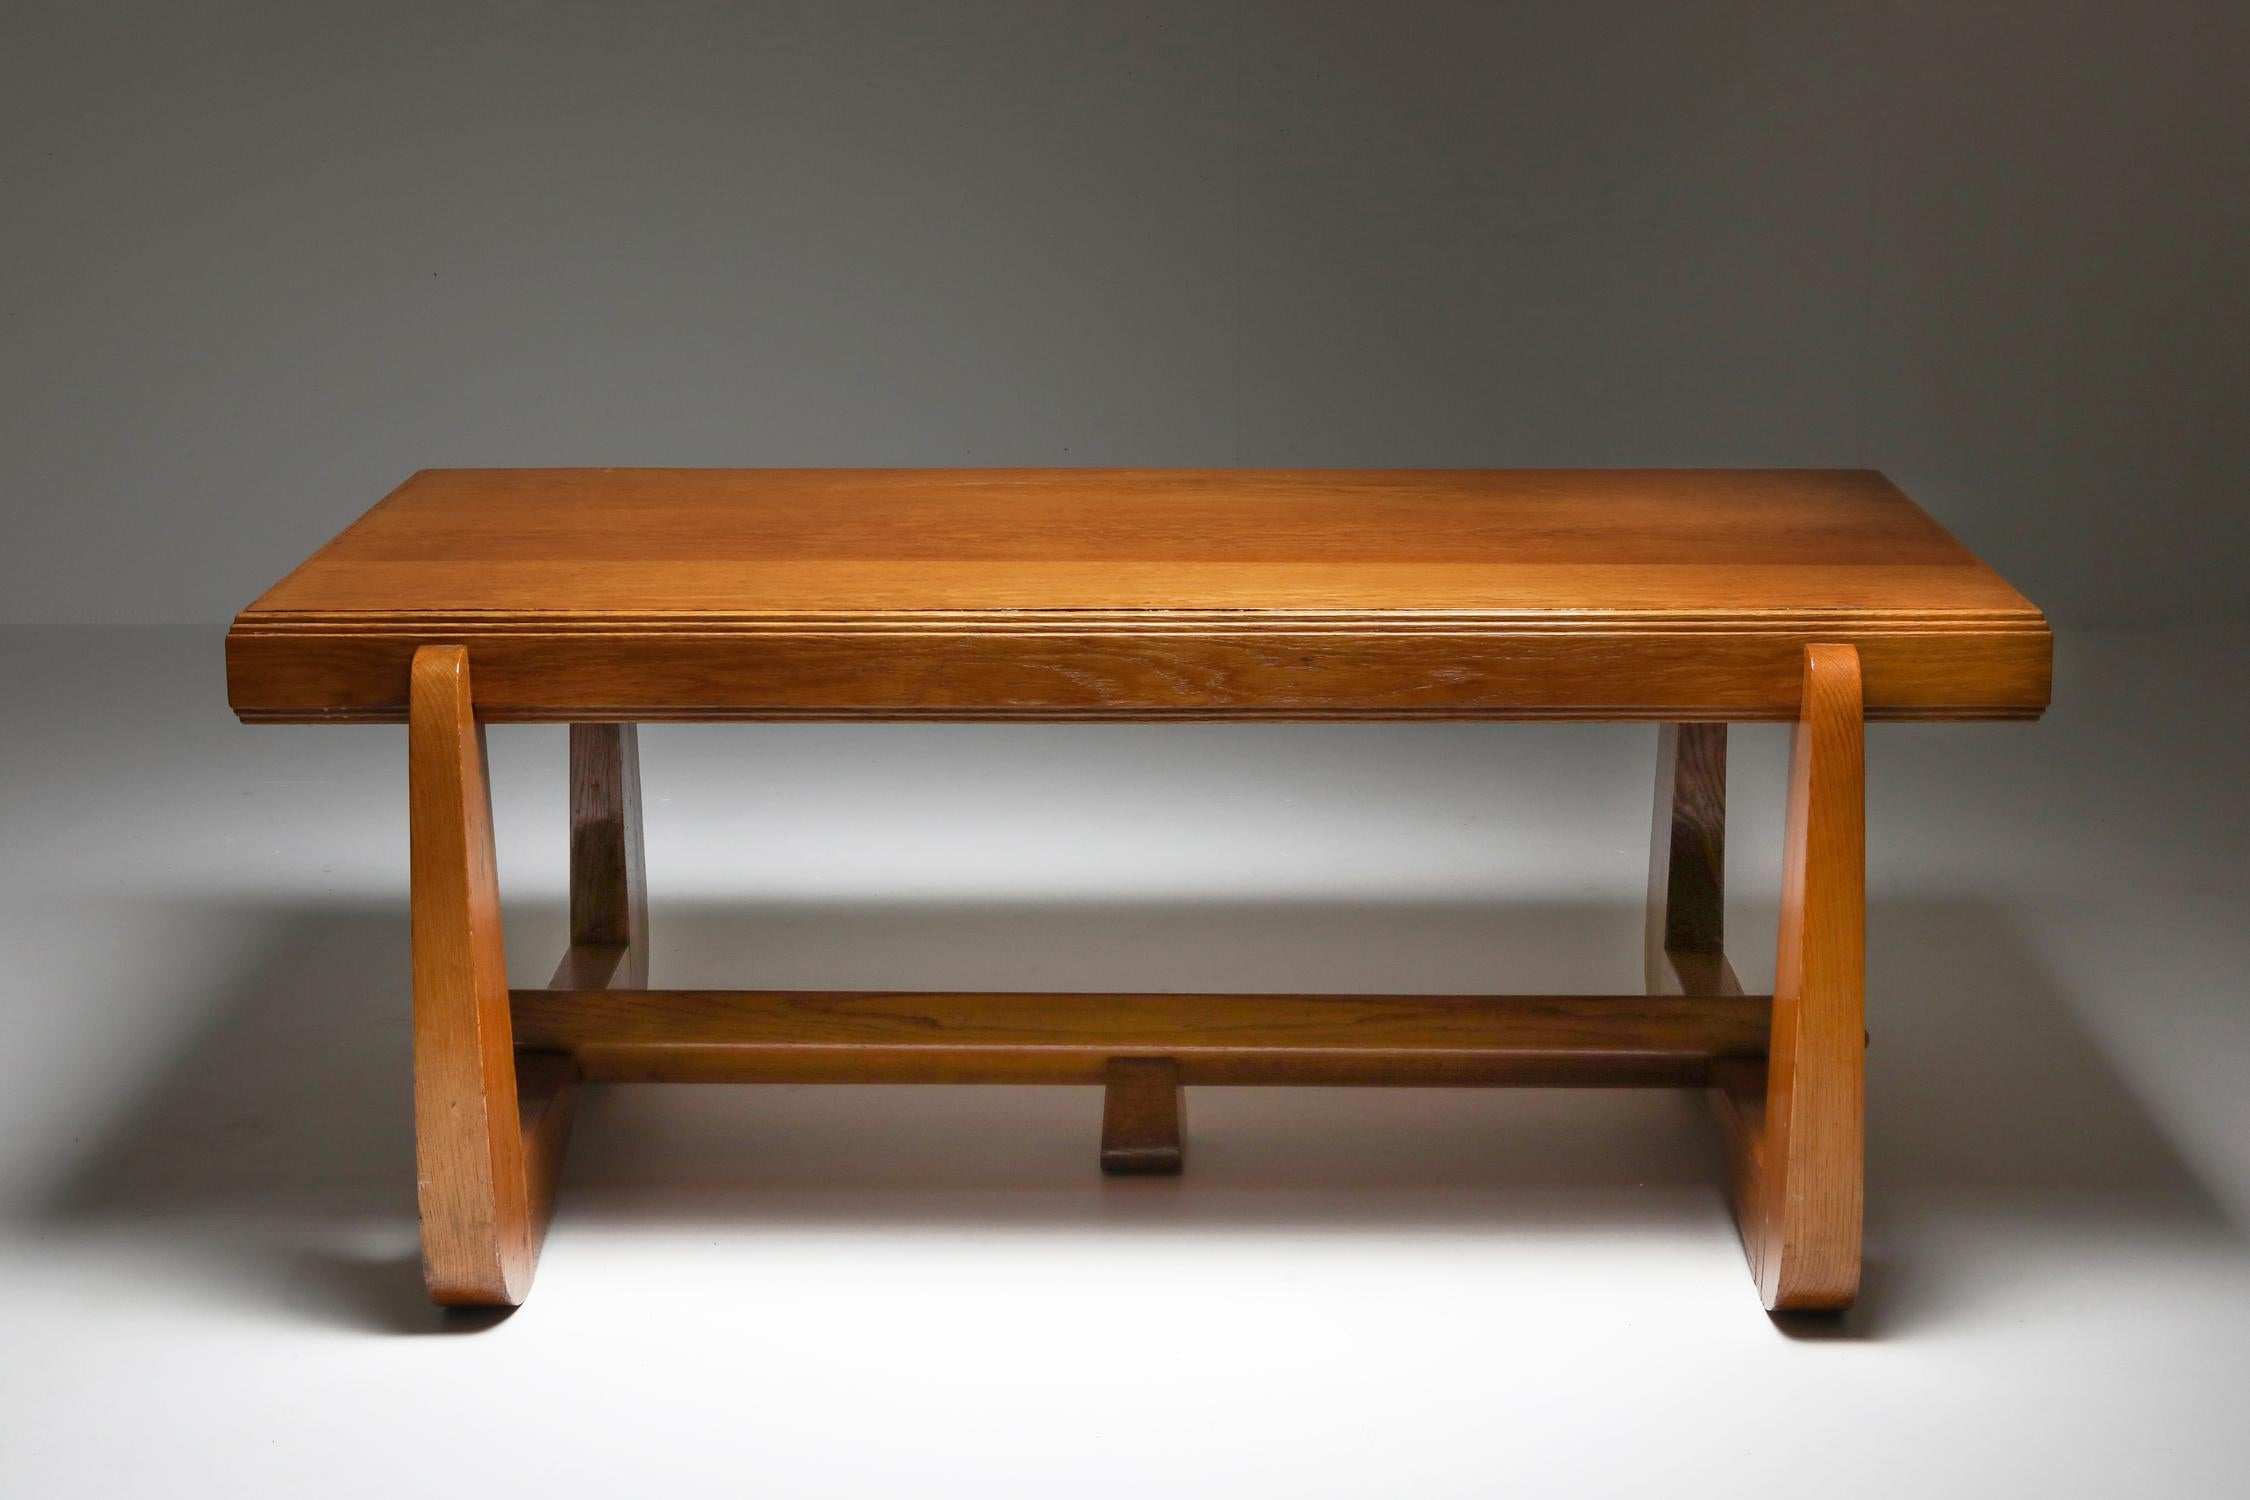 Art deco oak expressive table, a masterpiece of design by the iconic Amsterdam School movement from the 1930s. This exuberant and sculptural dining table draws its creative essence from the artistic vision of Dutch architects like Michel de Klerk